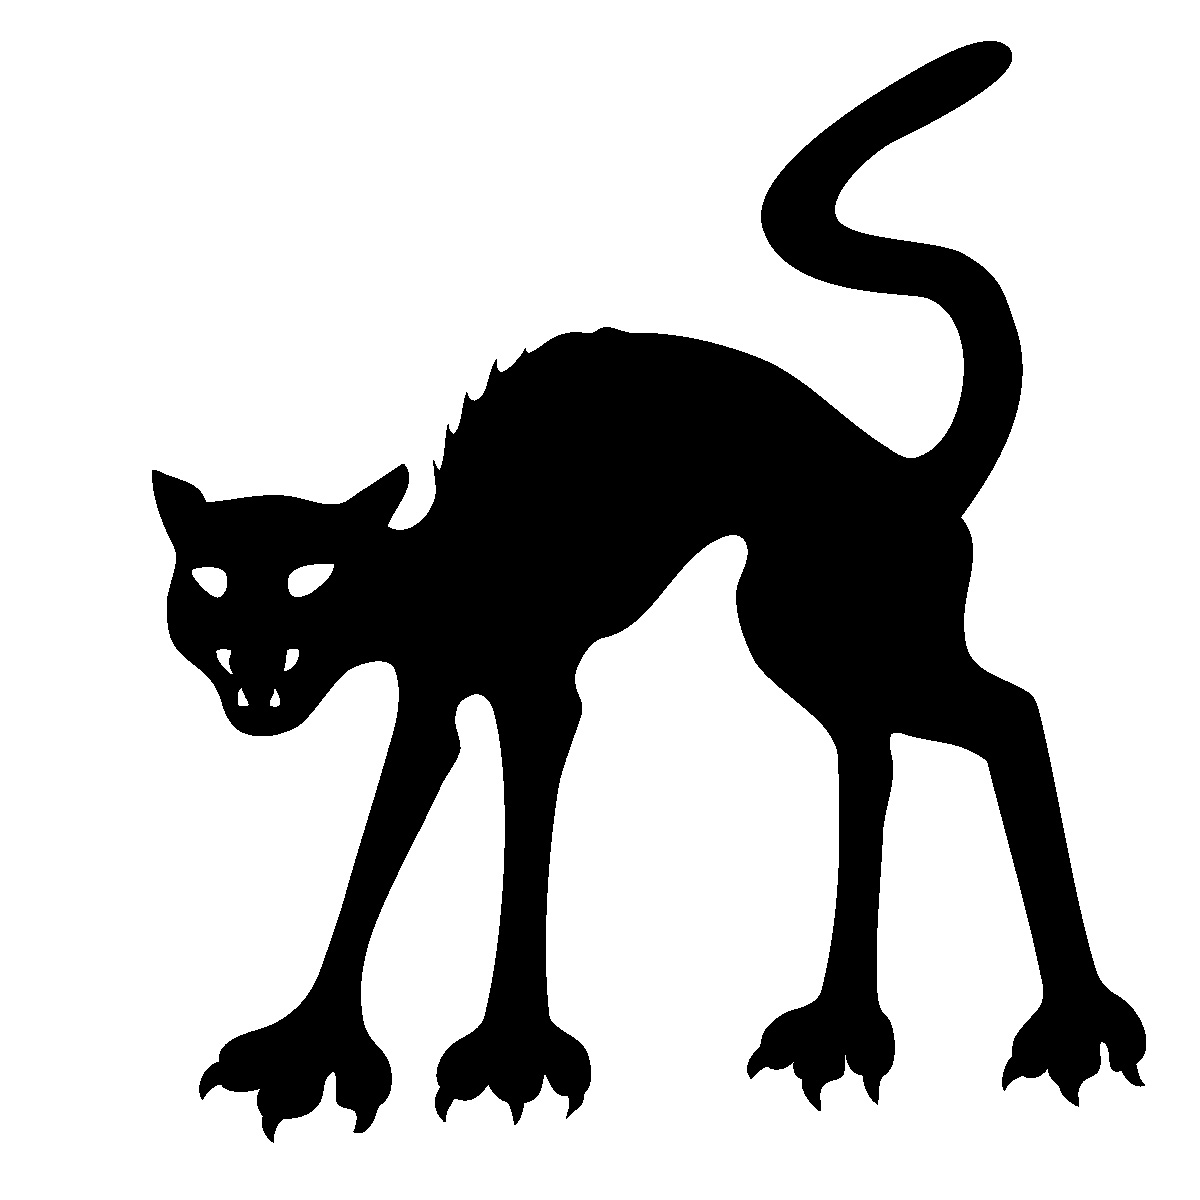 Halloween Cat Silhouette Clip - Scary Halloween Clipart